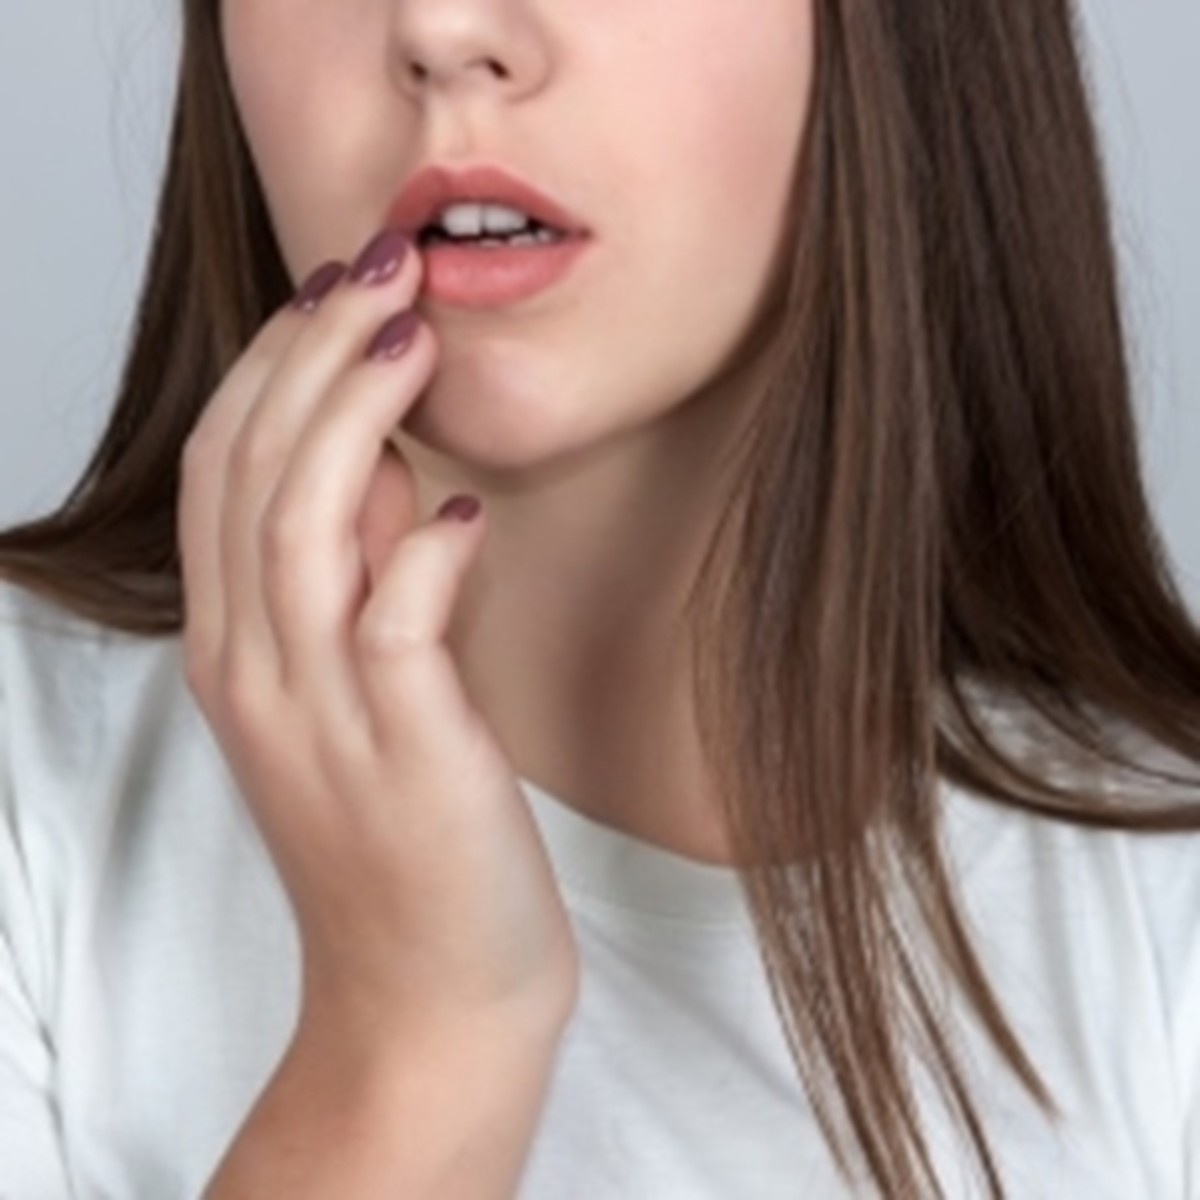 HSV type 1 is responsible for cold sores on lips.